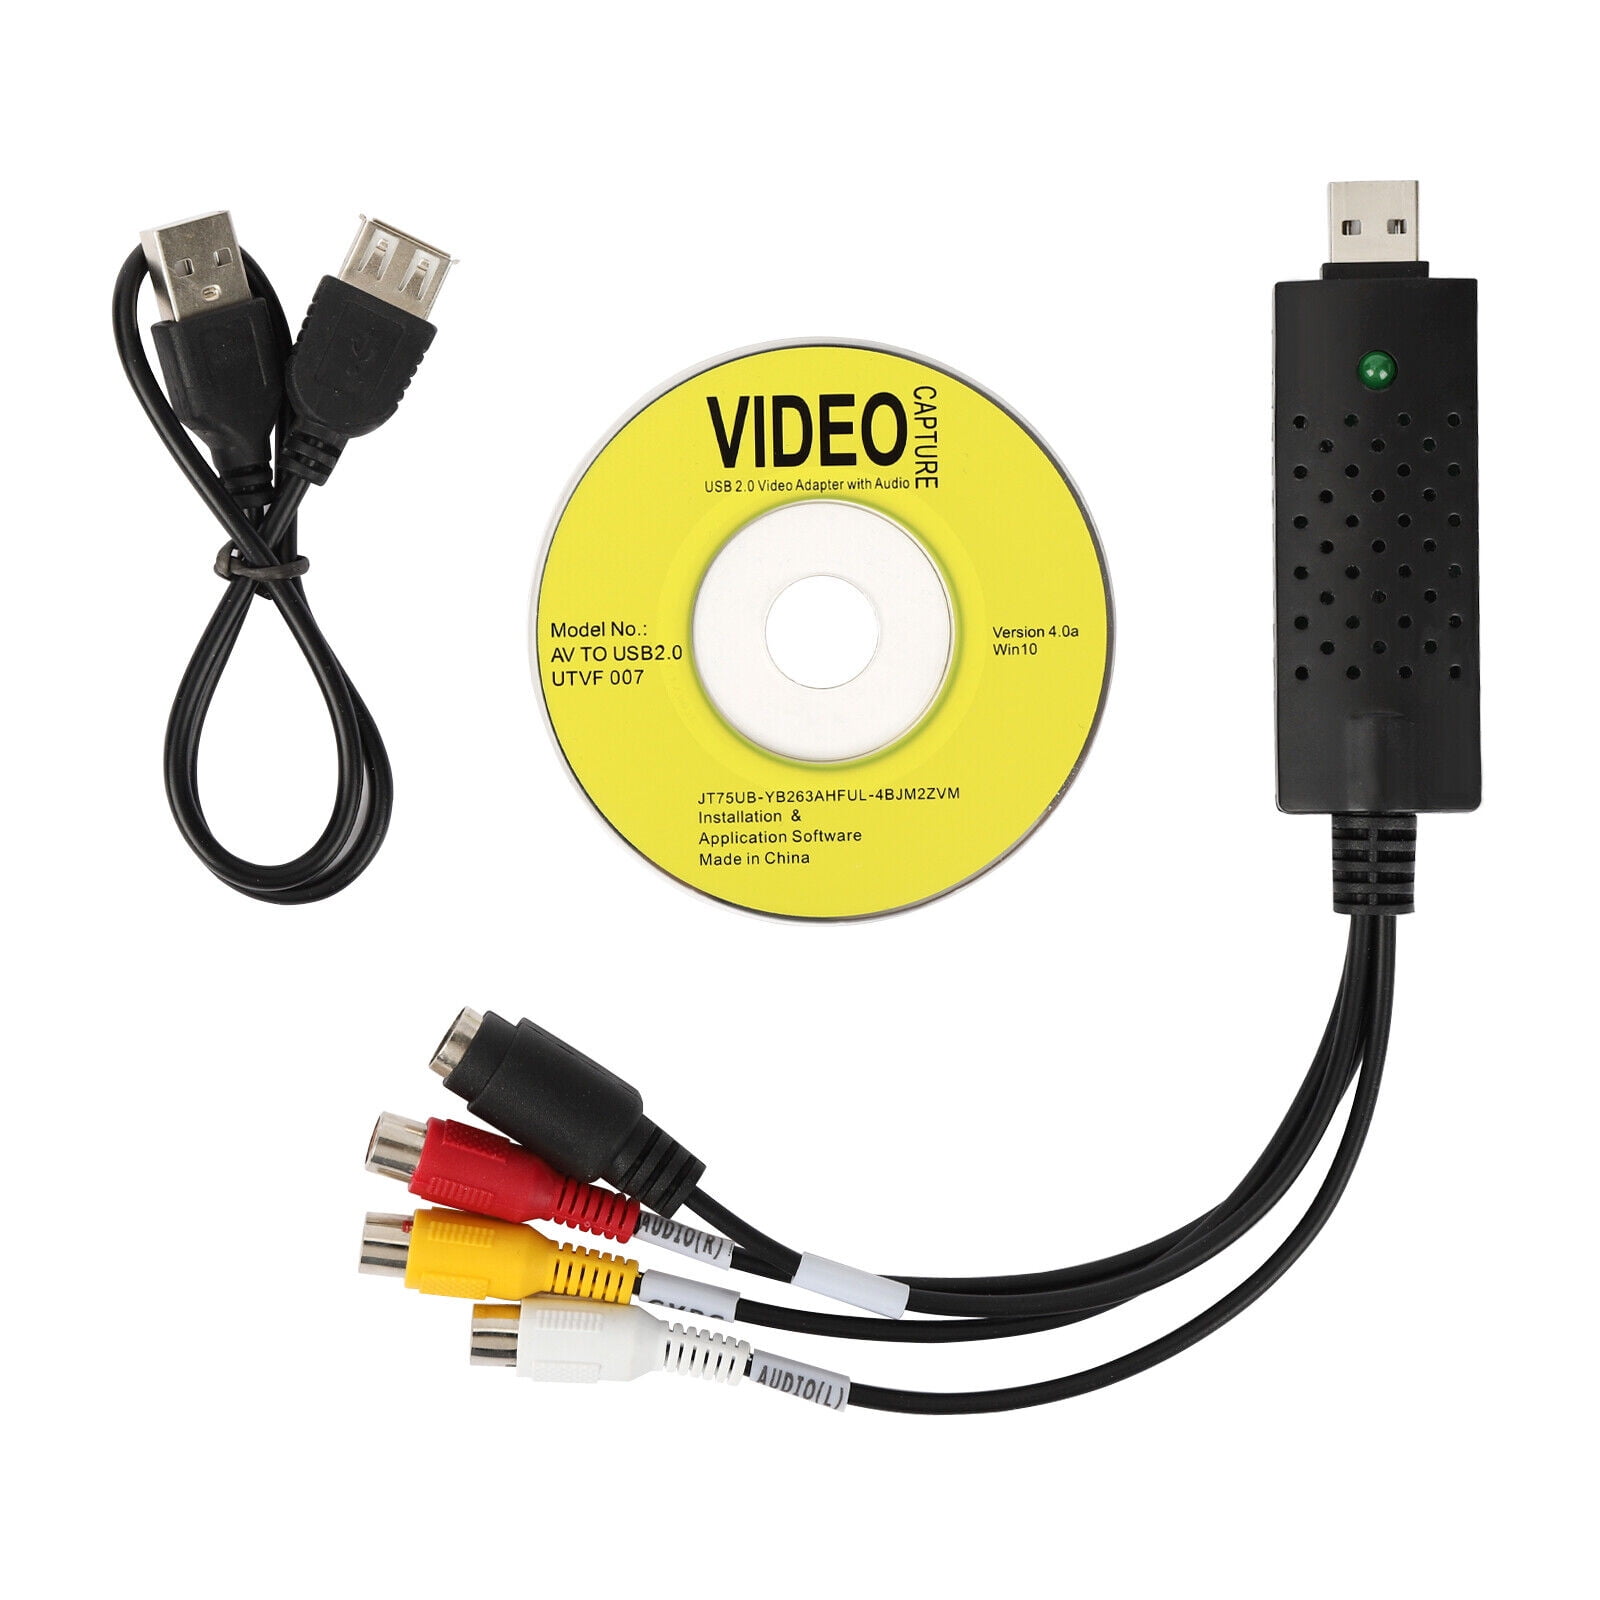 Easycap USB 2.0 Video Capture TV DVD VHS Video DVR Capture Adapter Card  with Audio Support Win7 for Computer/CCTV Camera 